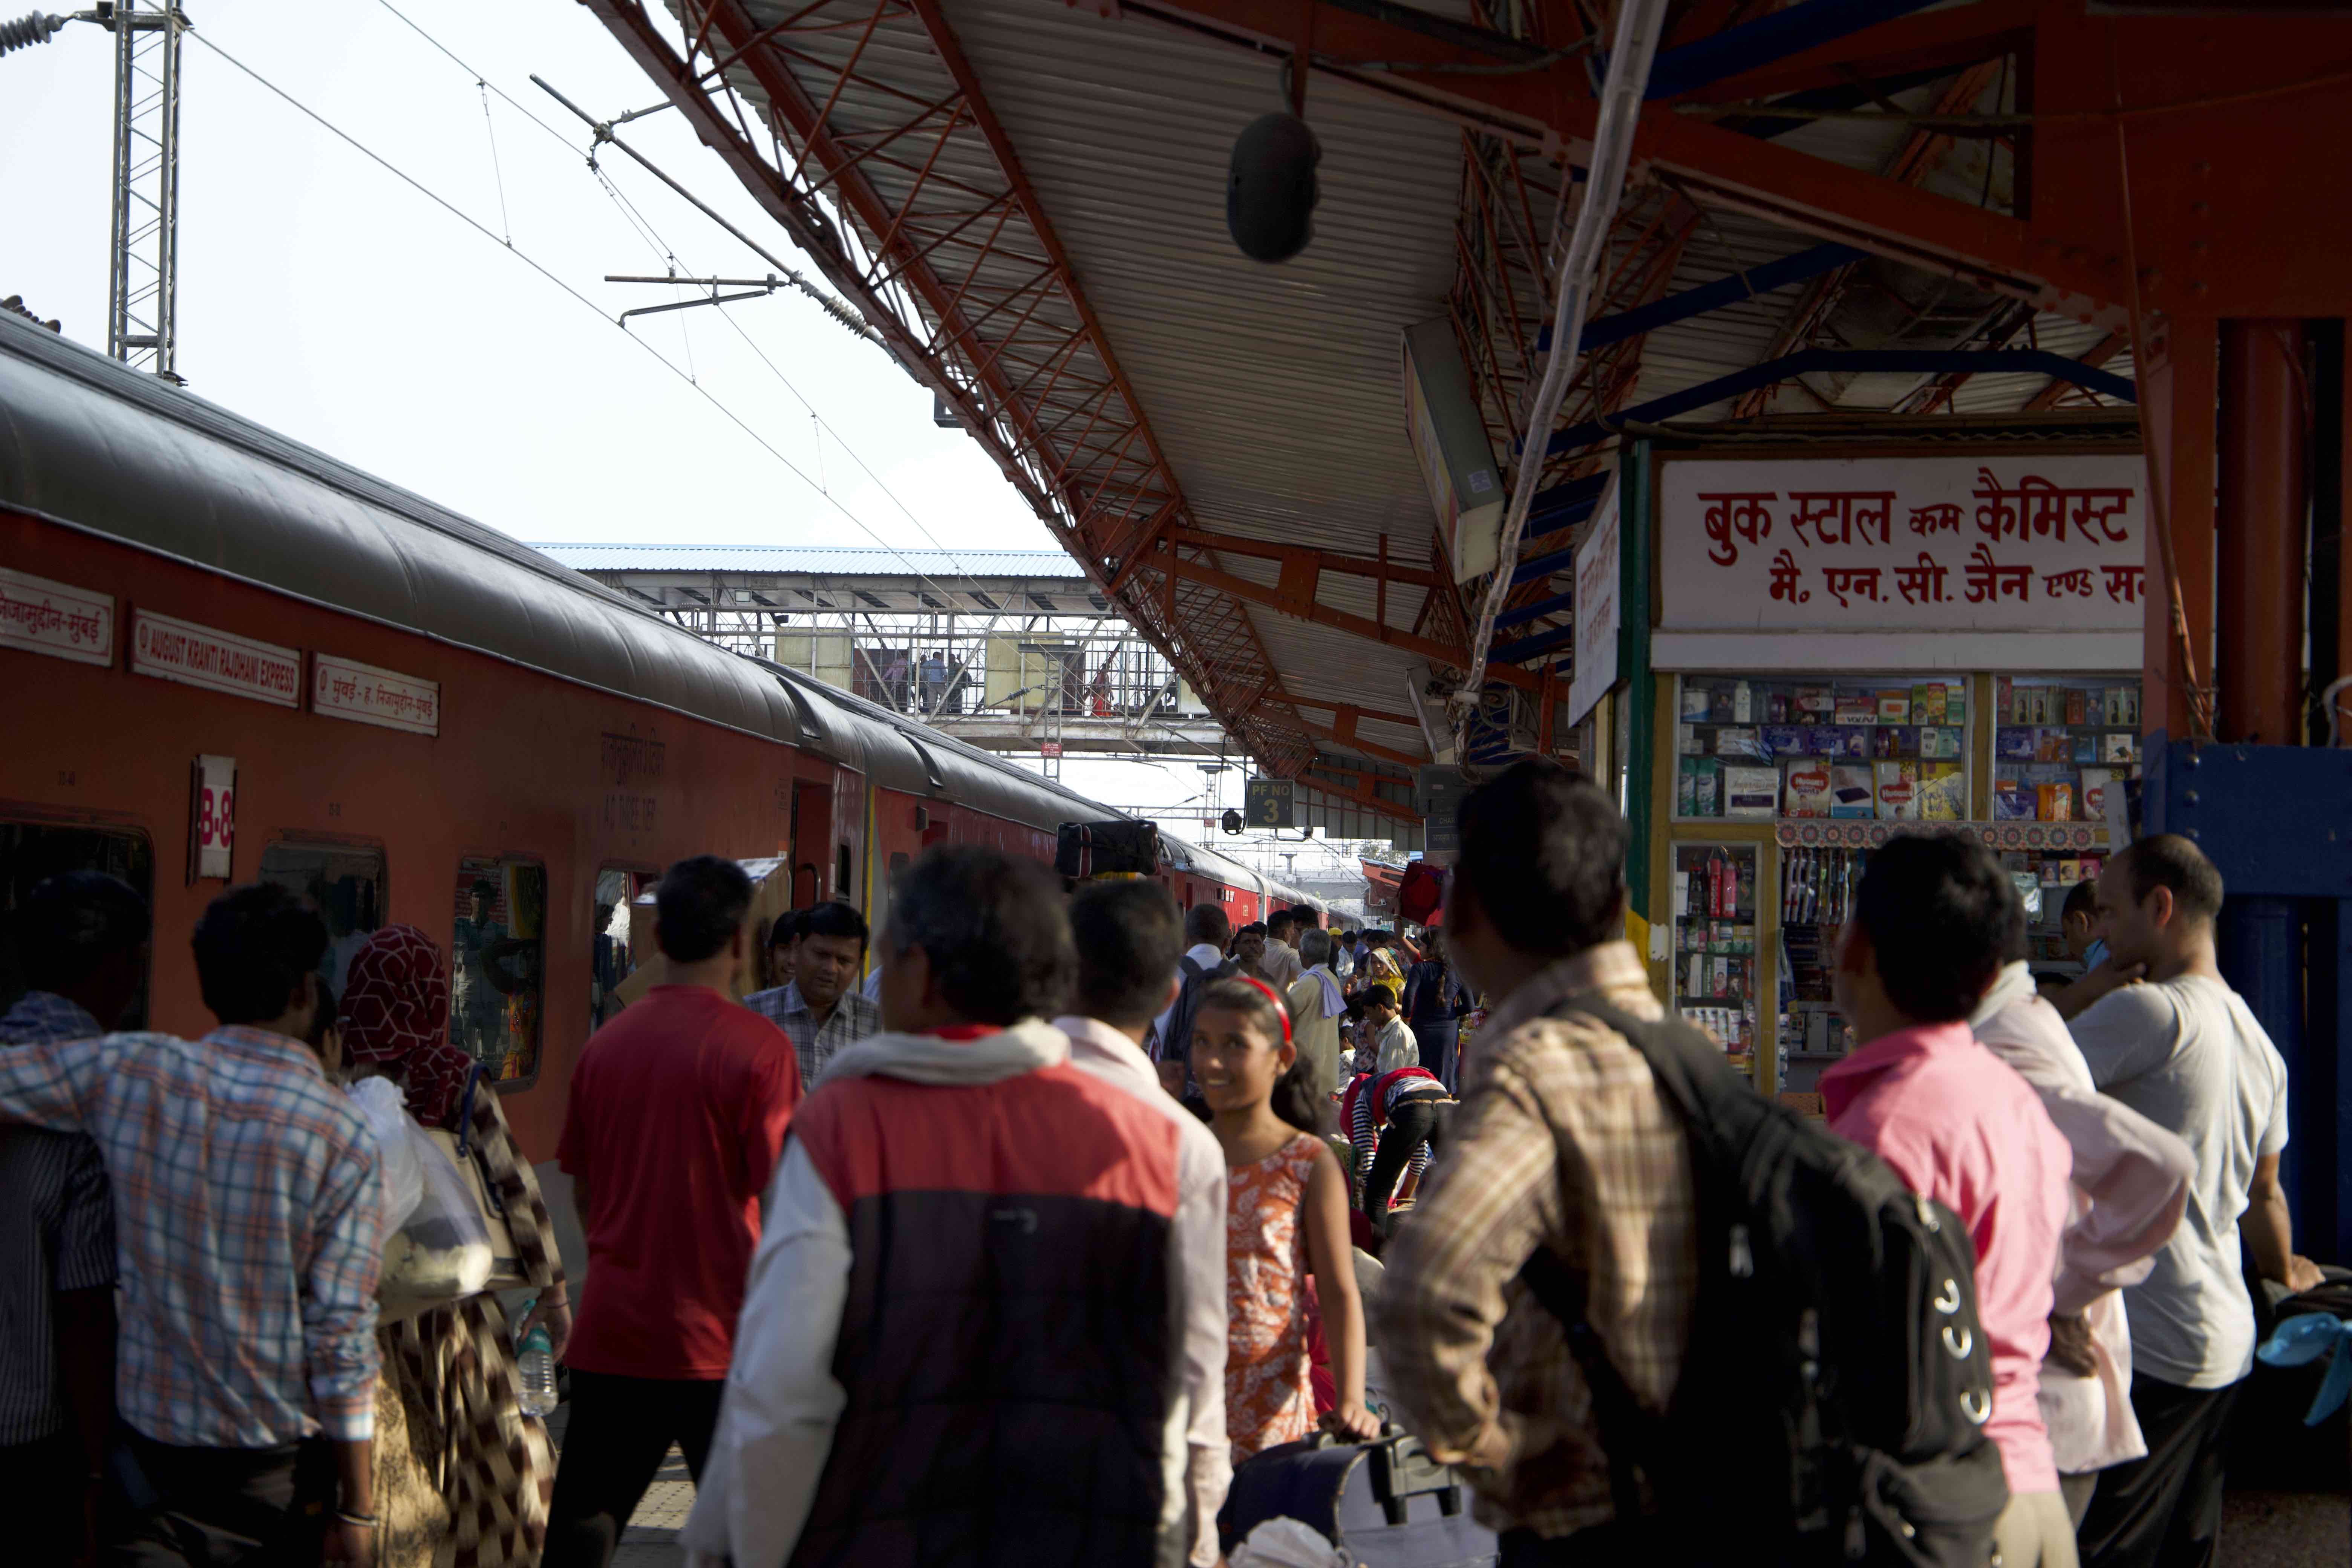 train station in India